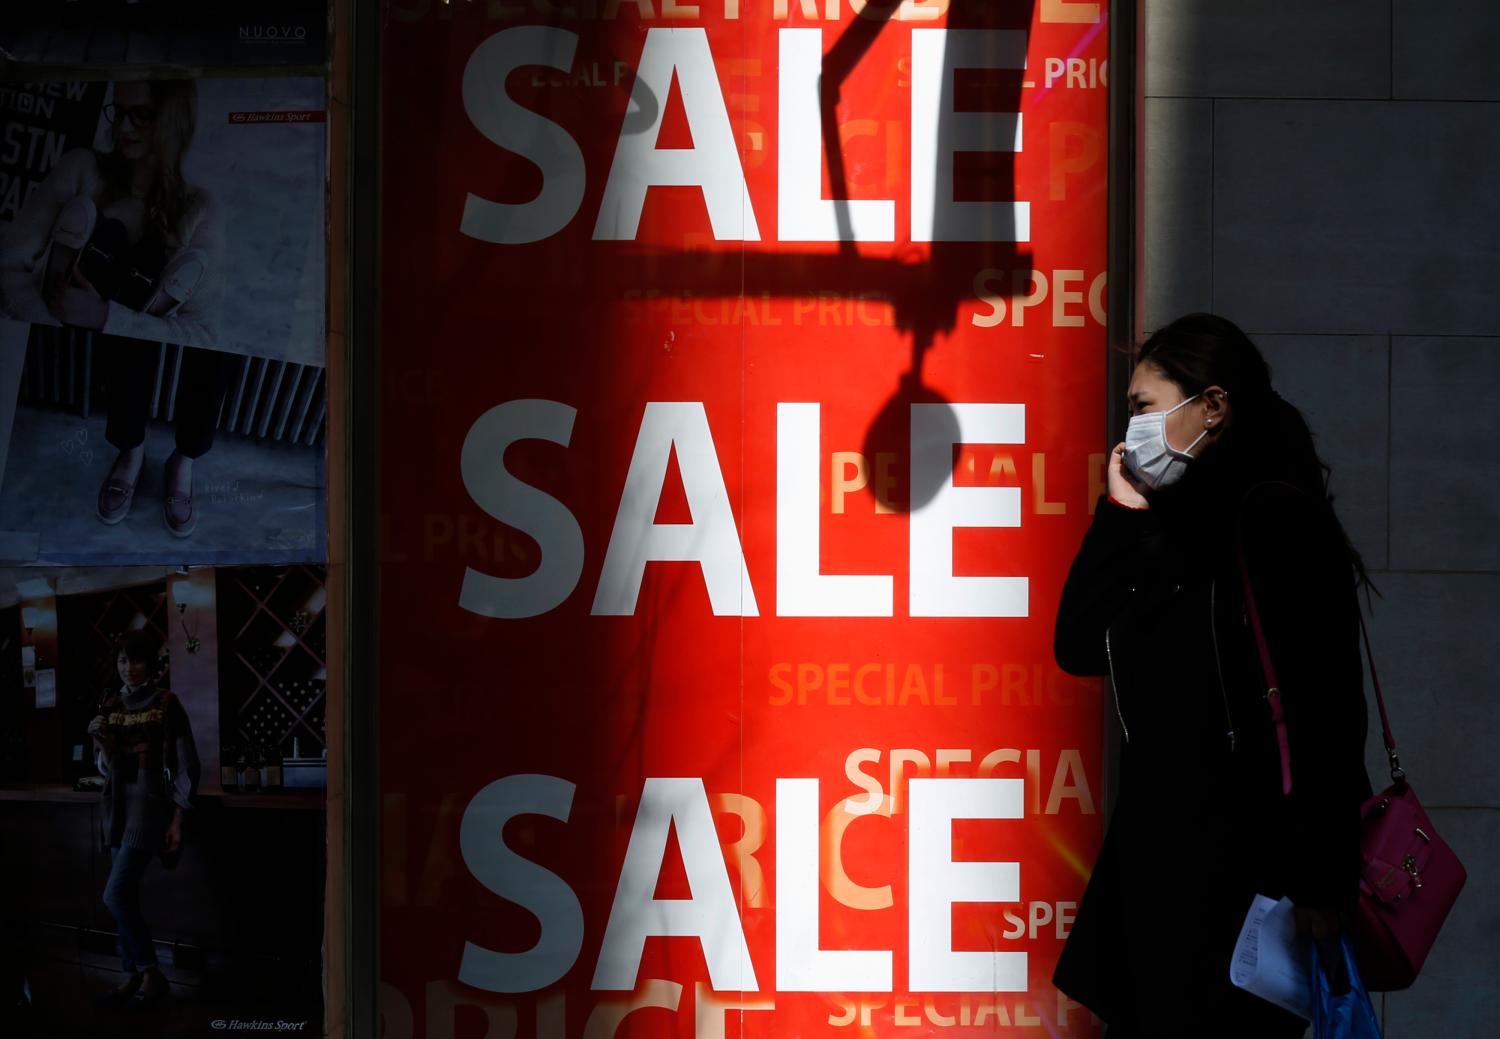 A woman holding her mobile phone walks past a sales advertisement poster in front of a shoe store in Tokyo February 15, 2015. Japan's economy rebounded from recession to grow an annualized 2.2 percent in the final quarter of last year, giving a much-needed boost to premier Shinzo Abe's efforts to shake off decades of stagnation even as the global outlook deteriorates. Picture taken February 15, 2015. REUTERS/Yuya Shino (JAPAN - Tags: BUSINESS POLITICS)